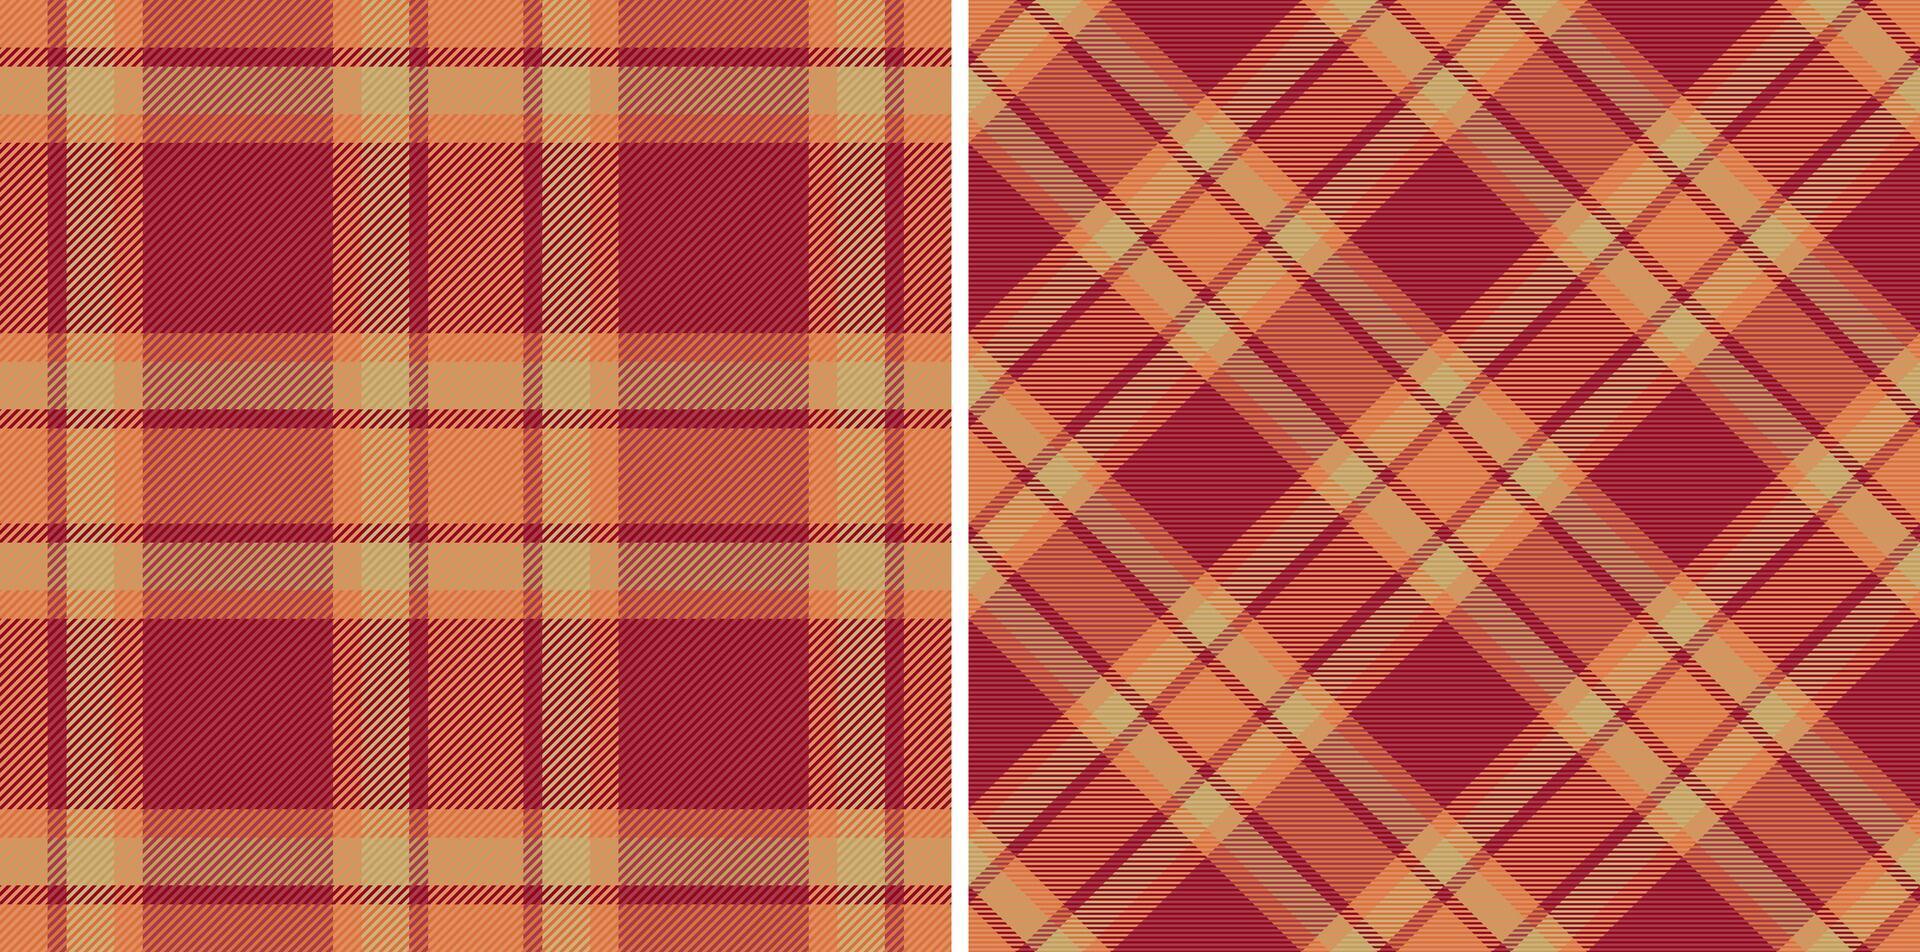 Texture tartan plaid of background textile fabric with a seamless check vector pattern.